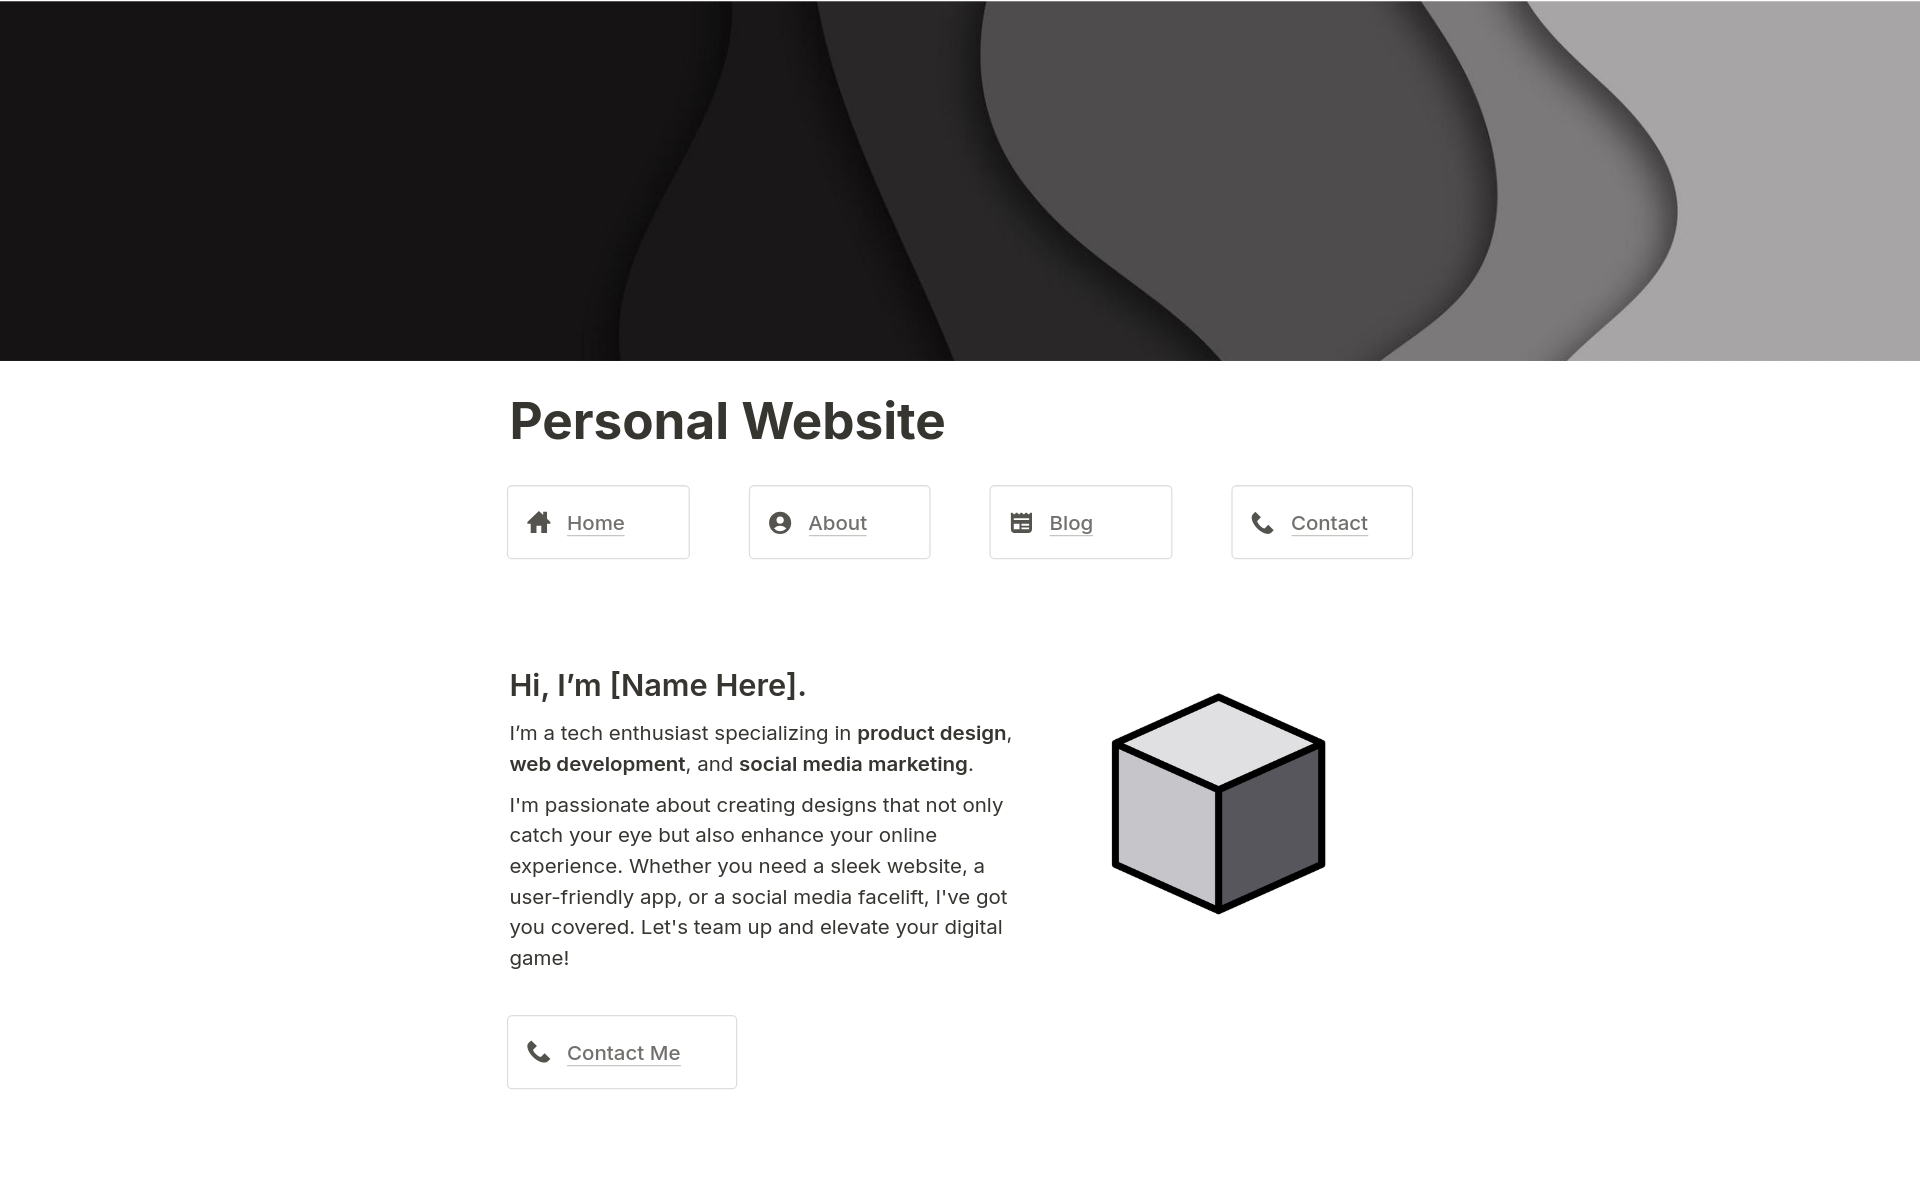 Set up your personal website on Notion to showcase your work and services in a professional and engaging way.